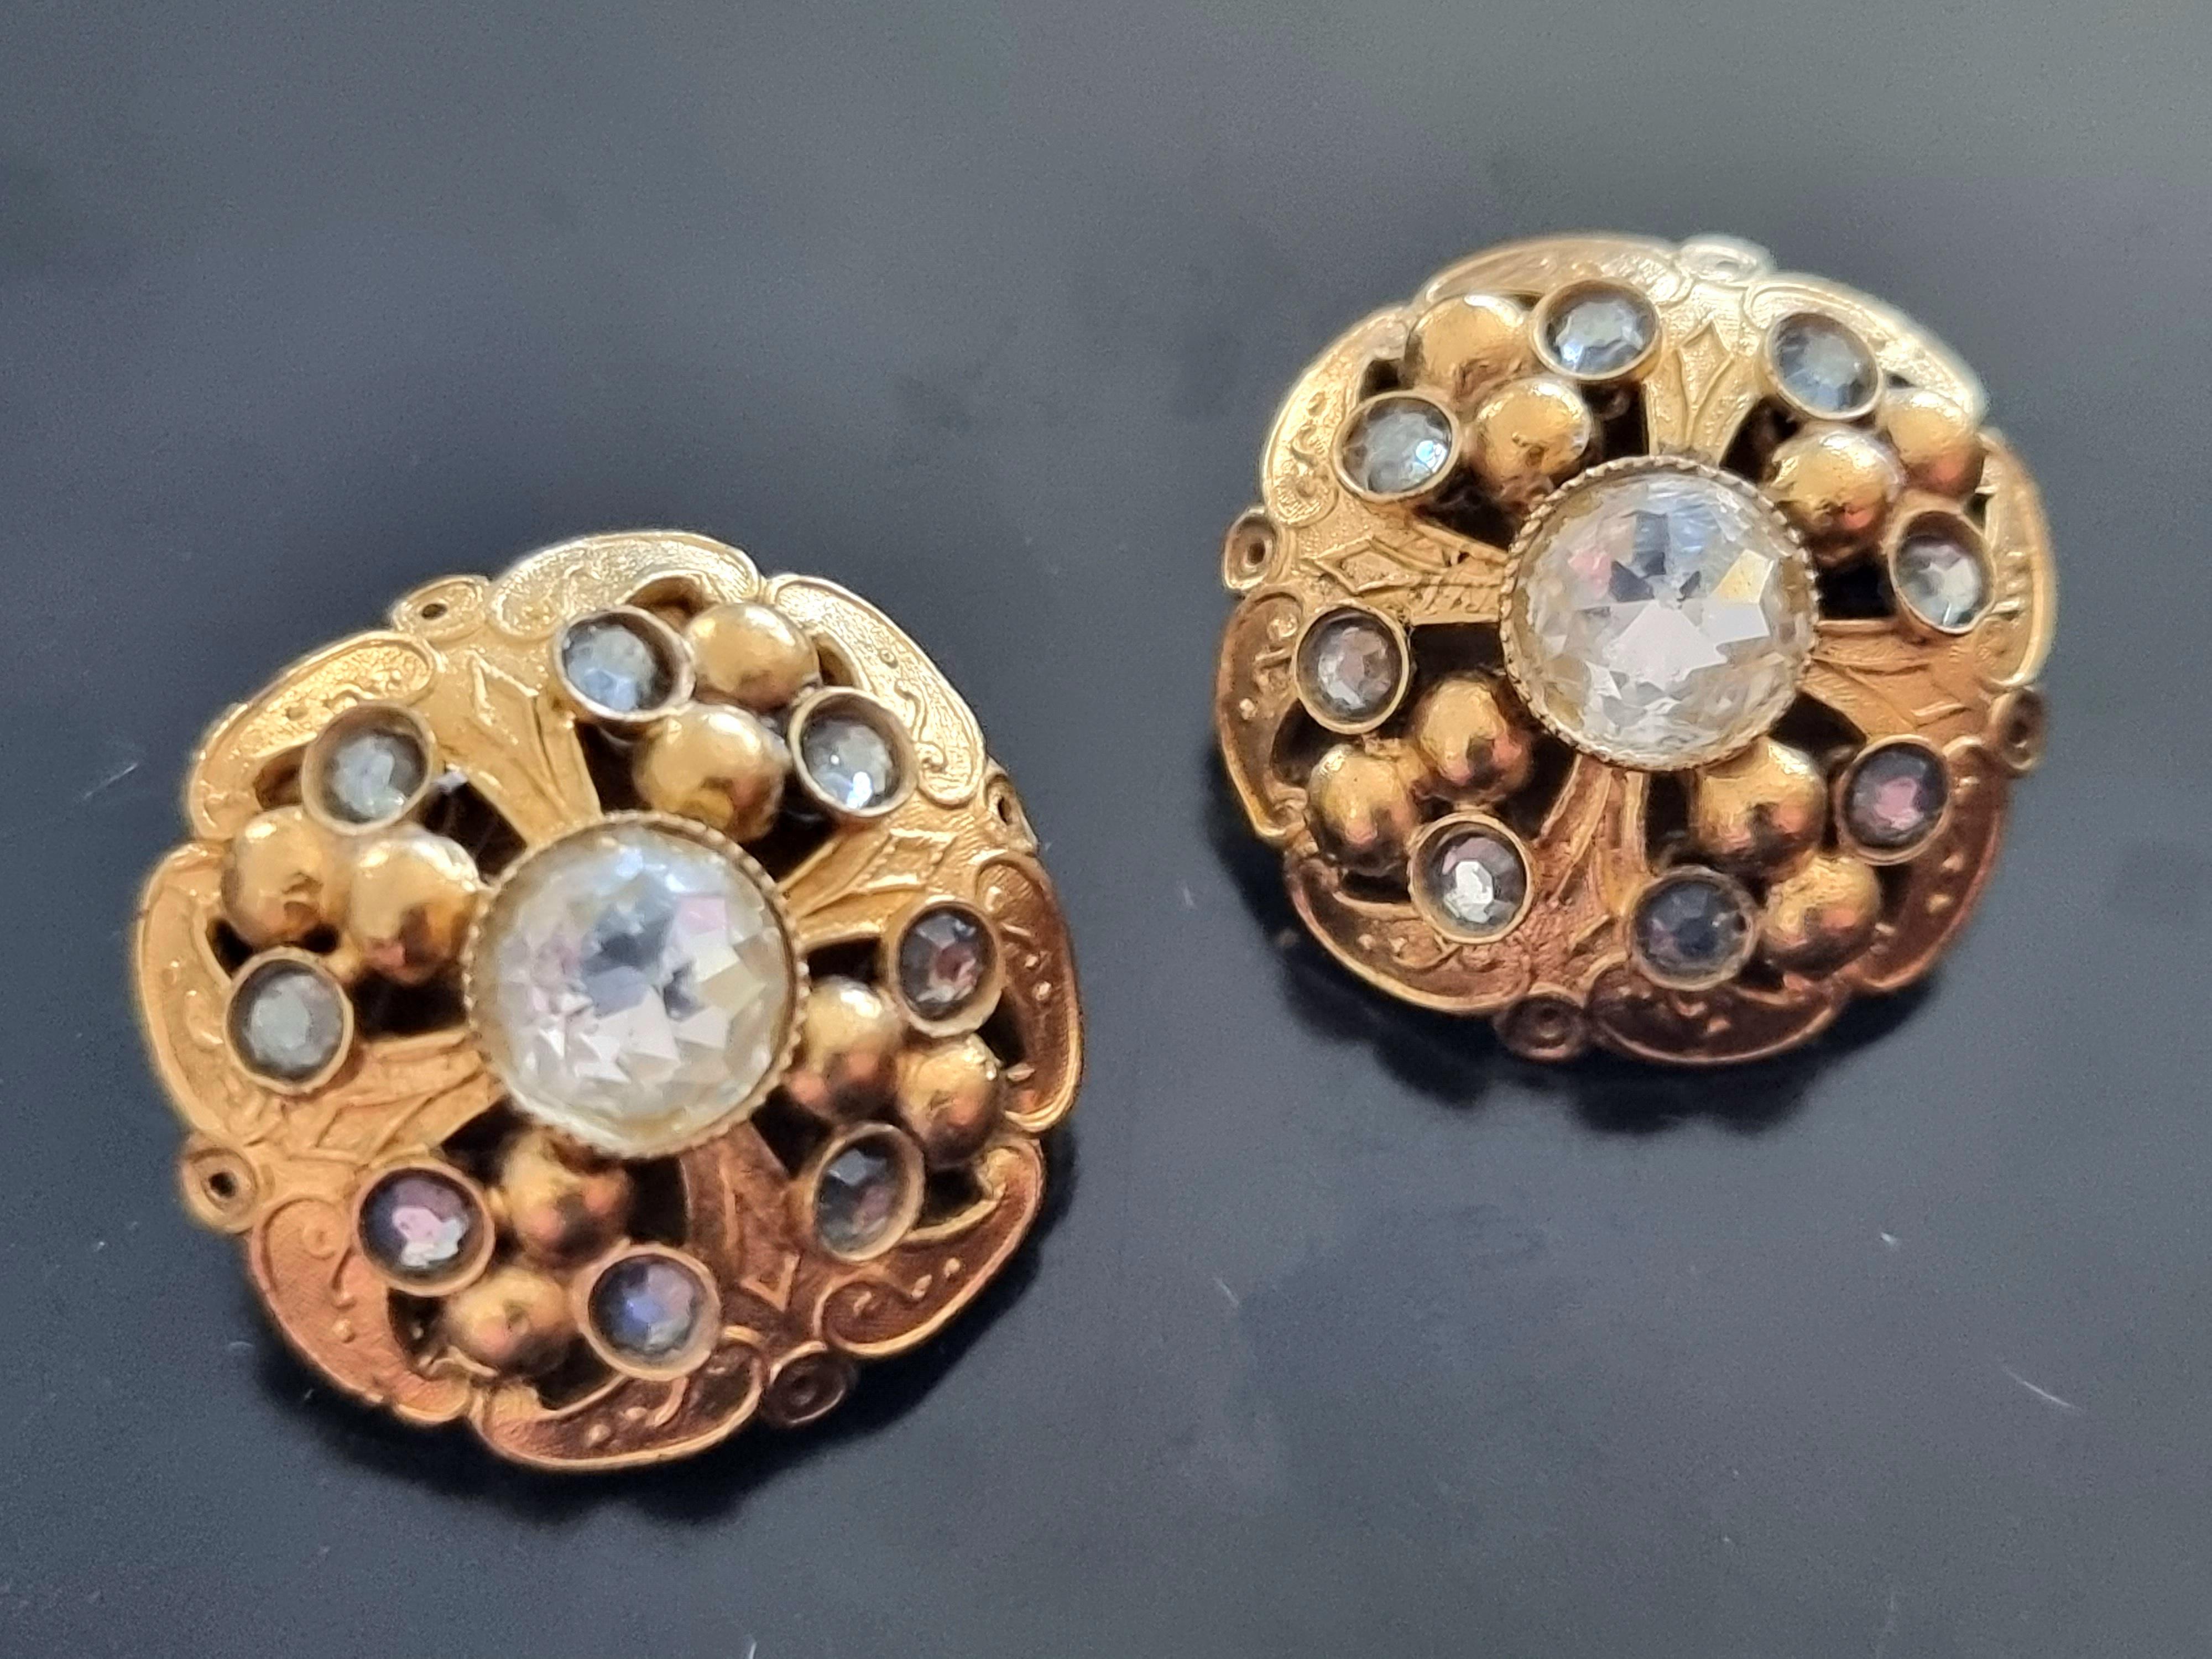 Sublime clip-on Earrings,,
50s vintage,
by Henry PERICHON, signed,
dimension 2.5 cm, weight 1 x 9 g,
good condition.

Henry Périchon, known as Henry, was the son of a jeweler and the grandson of a canute. In the 1950s, he settled in rue des